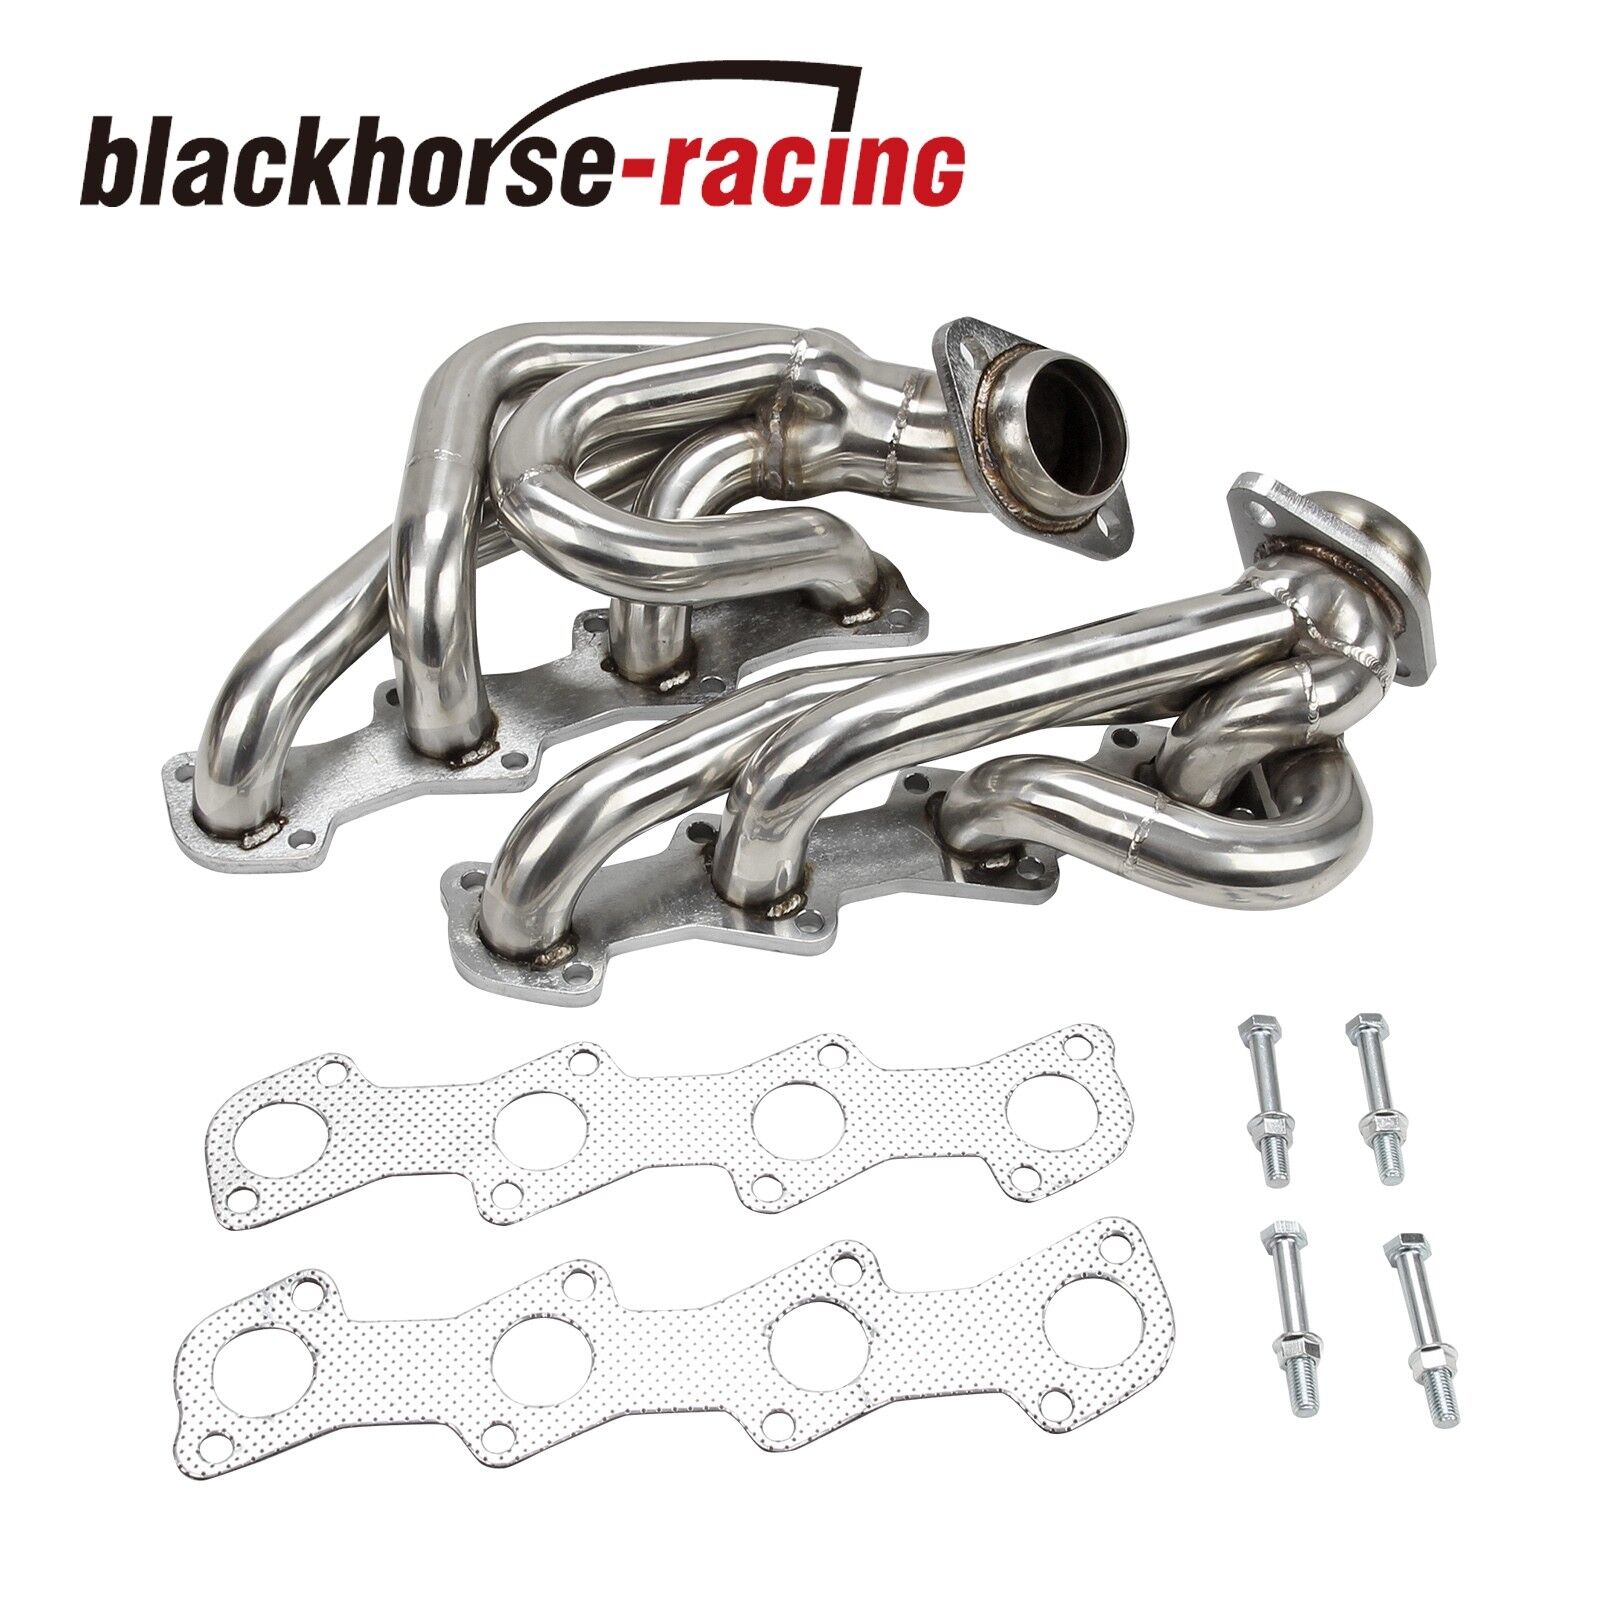 FOR 97-03 F150 F250 EXPEDITION V8 5.4 STAINLESS STEEL HEADER/EXHAUST MANIFOLD